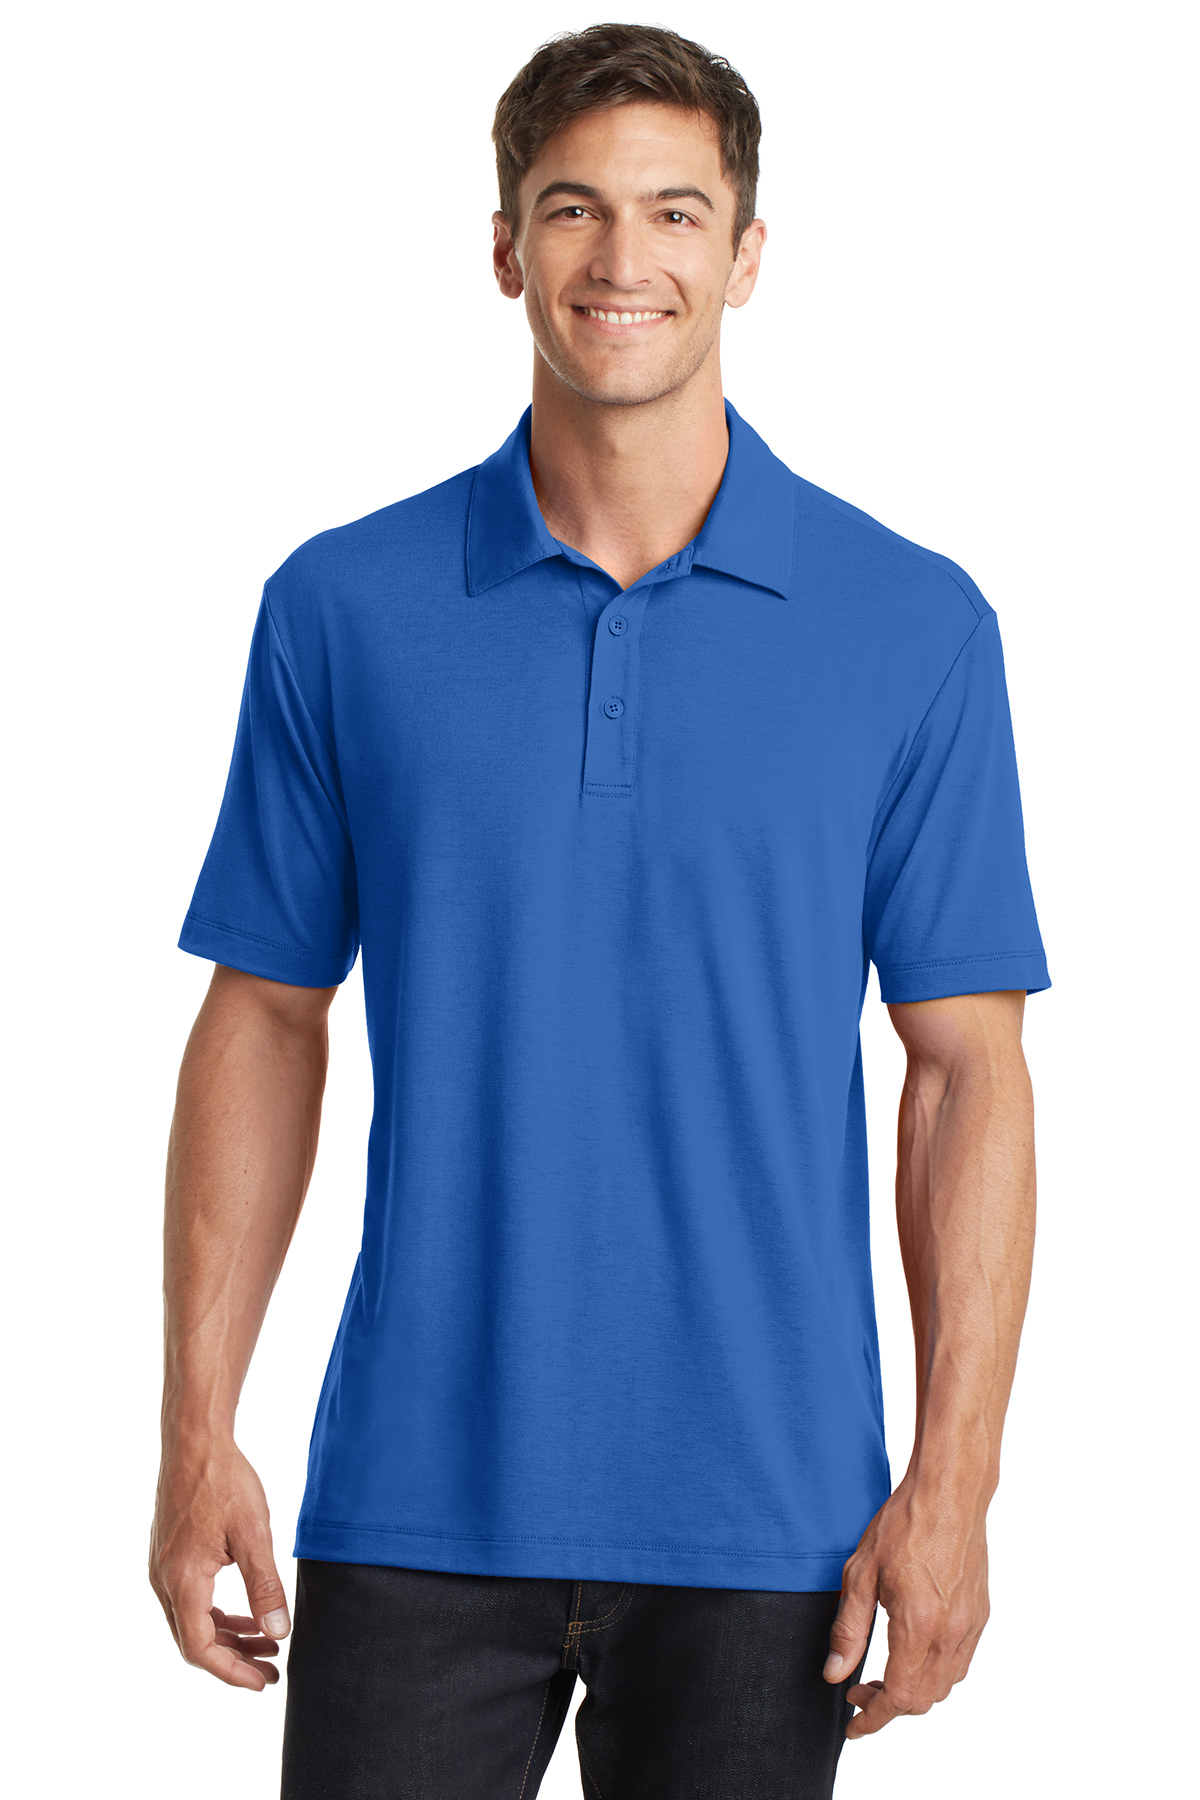 Port Authority ® Ladies Cotton Touch ™ Performance Polo